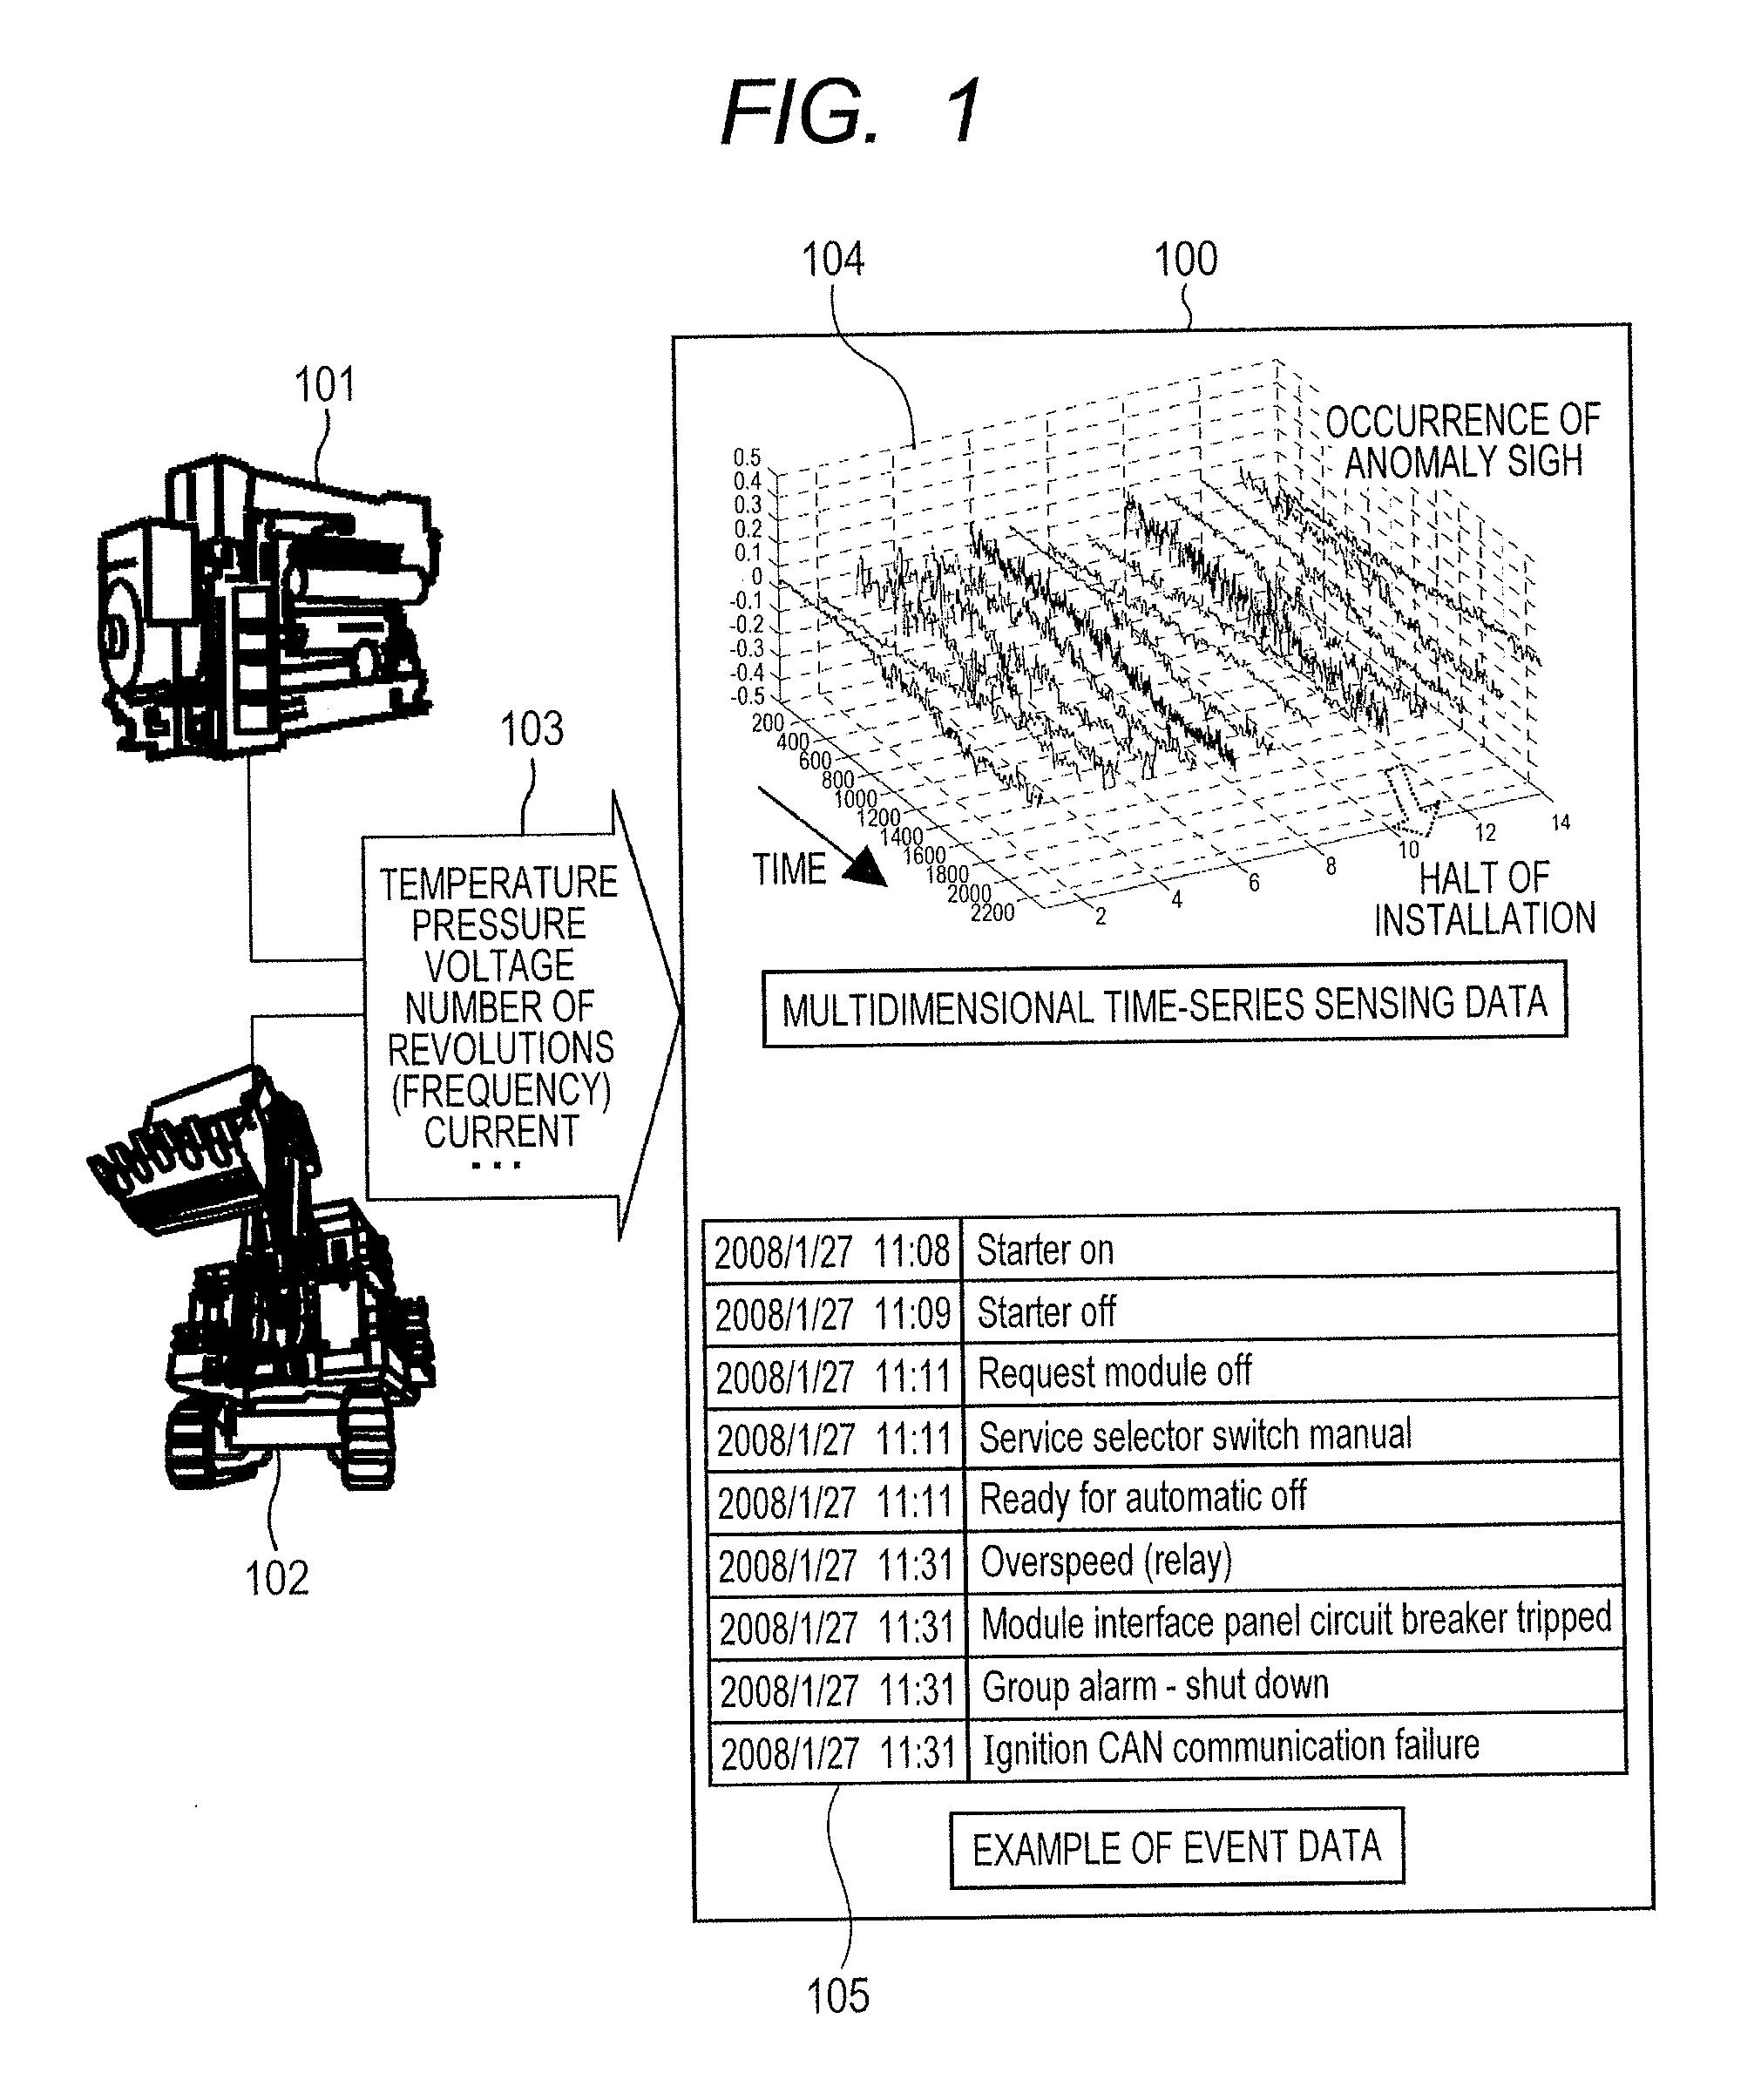 Malfunction Detection Method and System Thereof